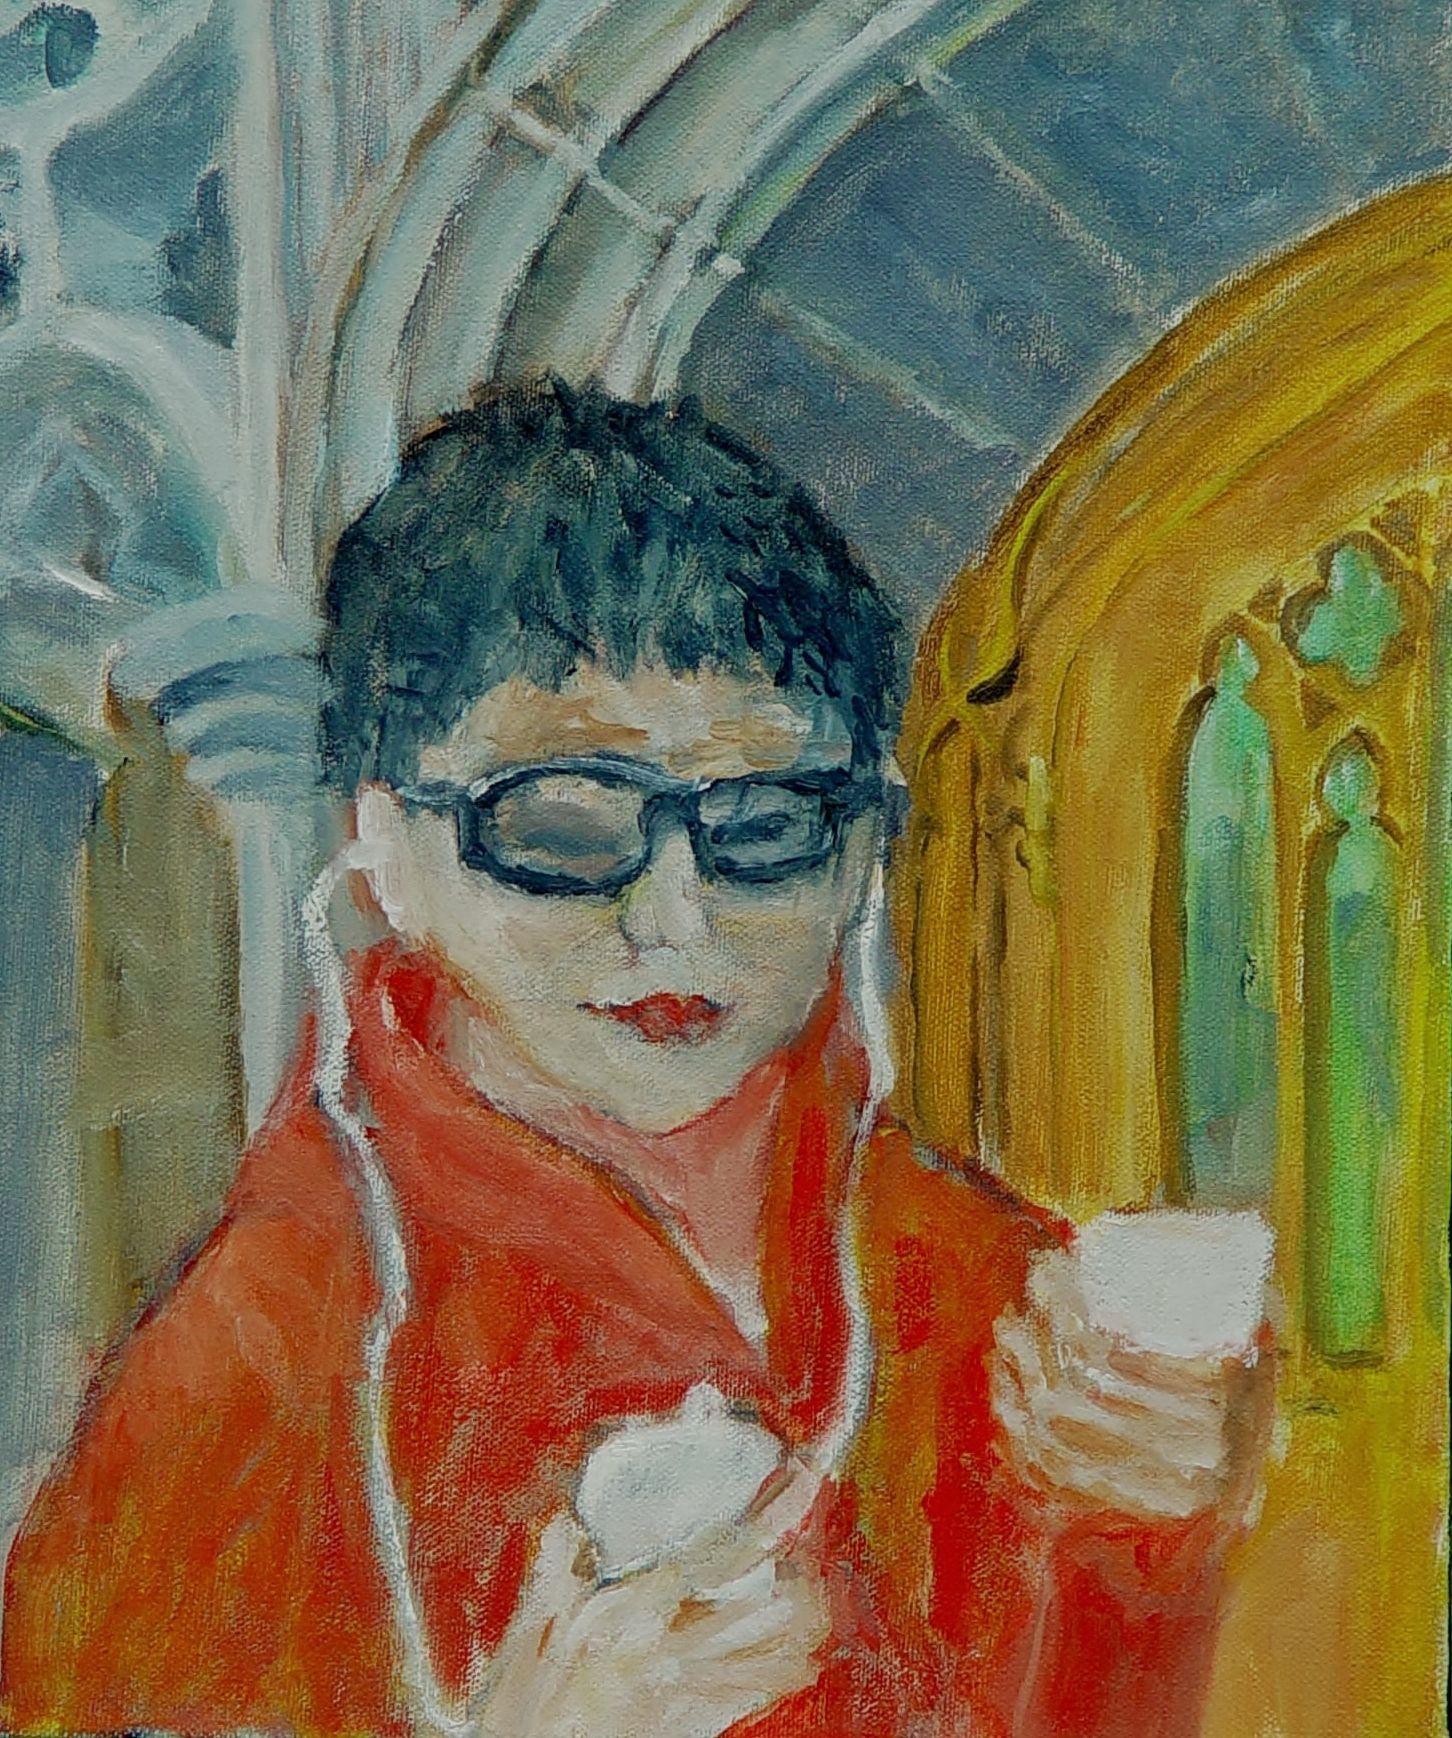 This painting is a portrait of a woman, who is a lively, young student at the University of Chicago.  I am an architect, as well as an artist, and I am inspired by the beauty of the Gothic architecture at UChicago.  The student, with her electronic